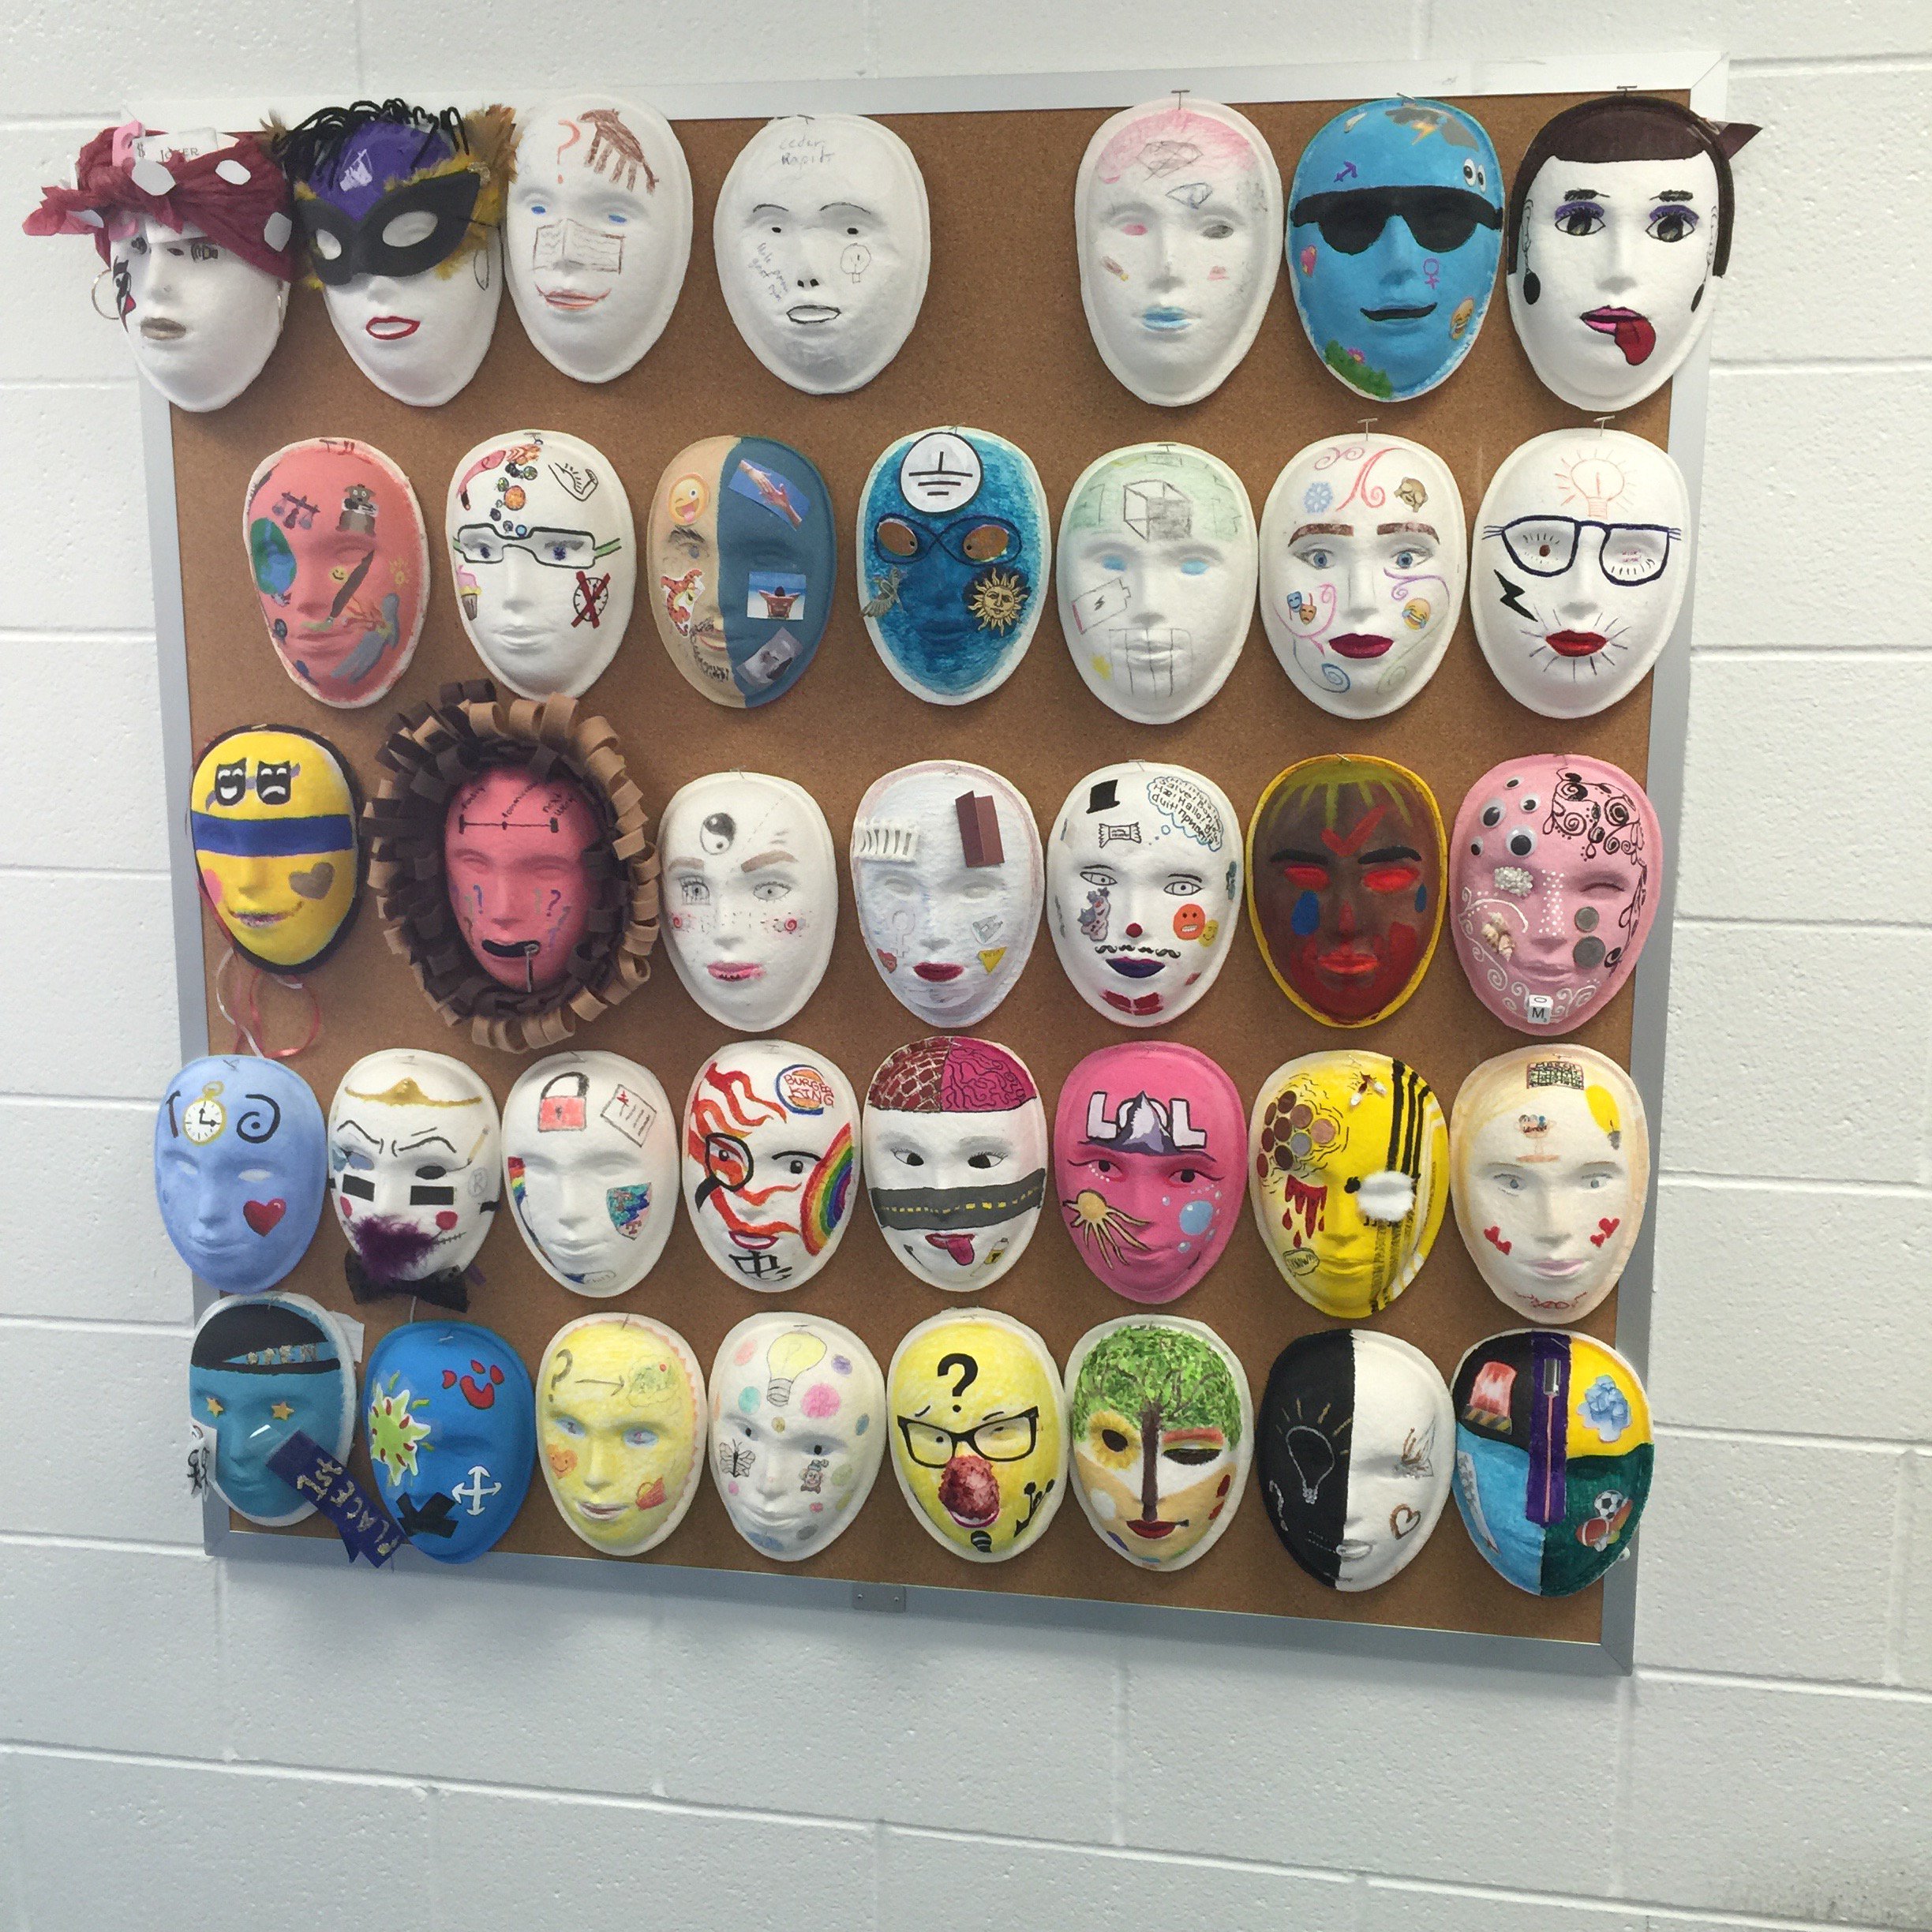 Perversion Teasing Gooey J Kevin Denson on Twitter: "Personality Mask Projects Day 1! #psychat Some  very creative mask that The archetype master Carl Jung would love.  https://t.co/LOYPHQLWAF" / Twitter